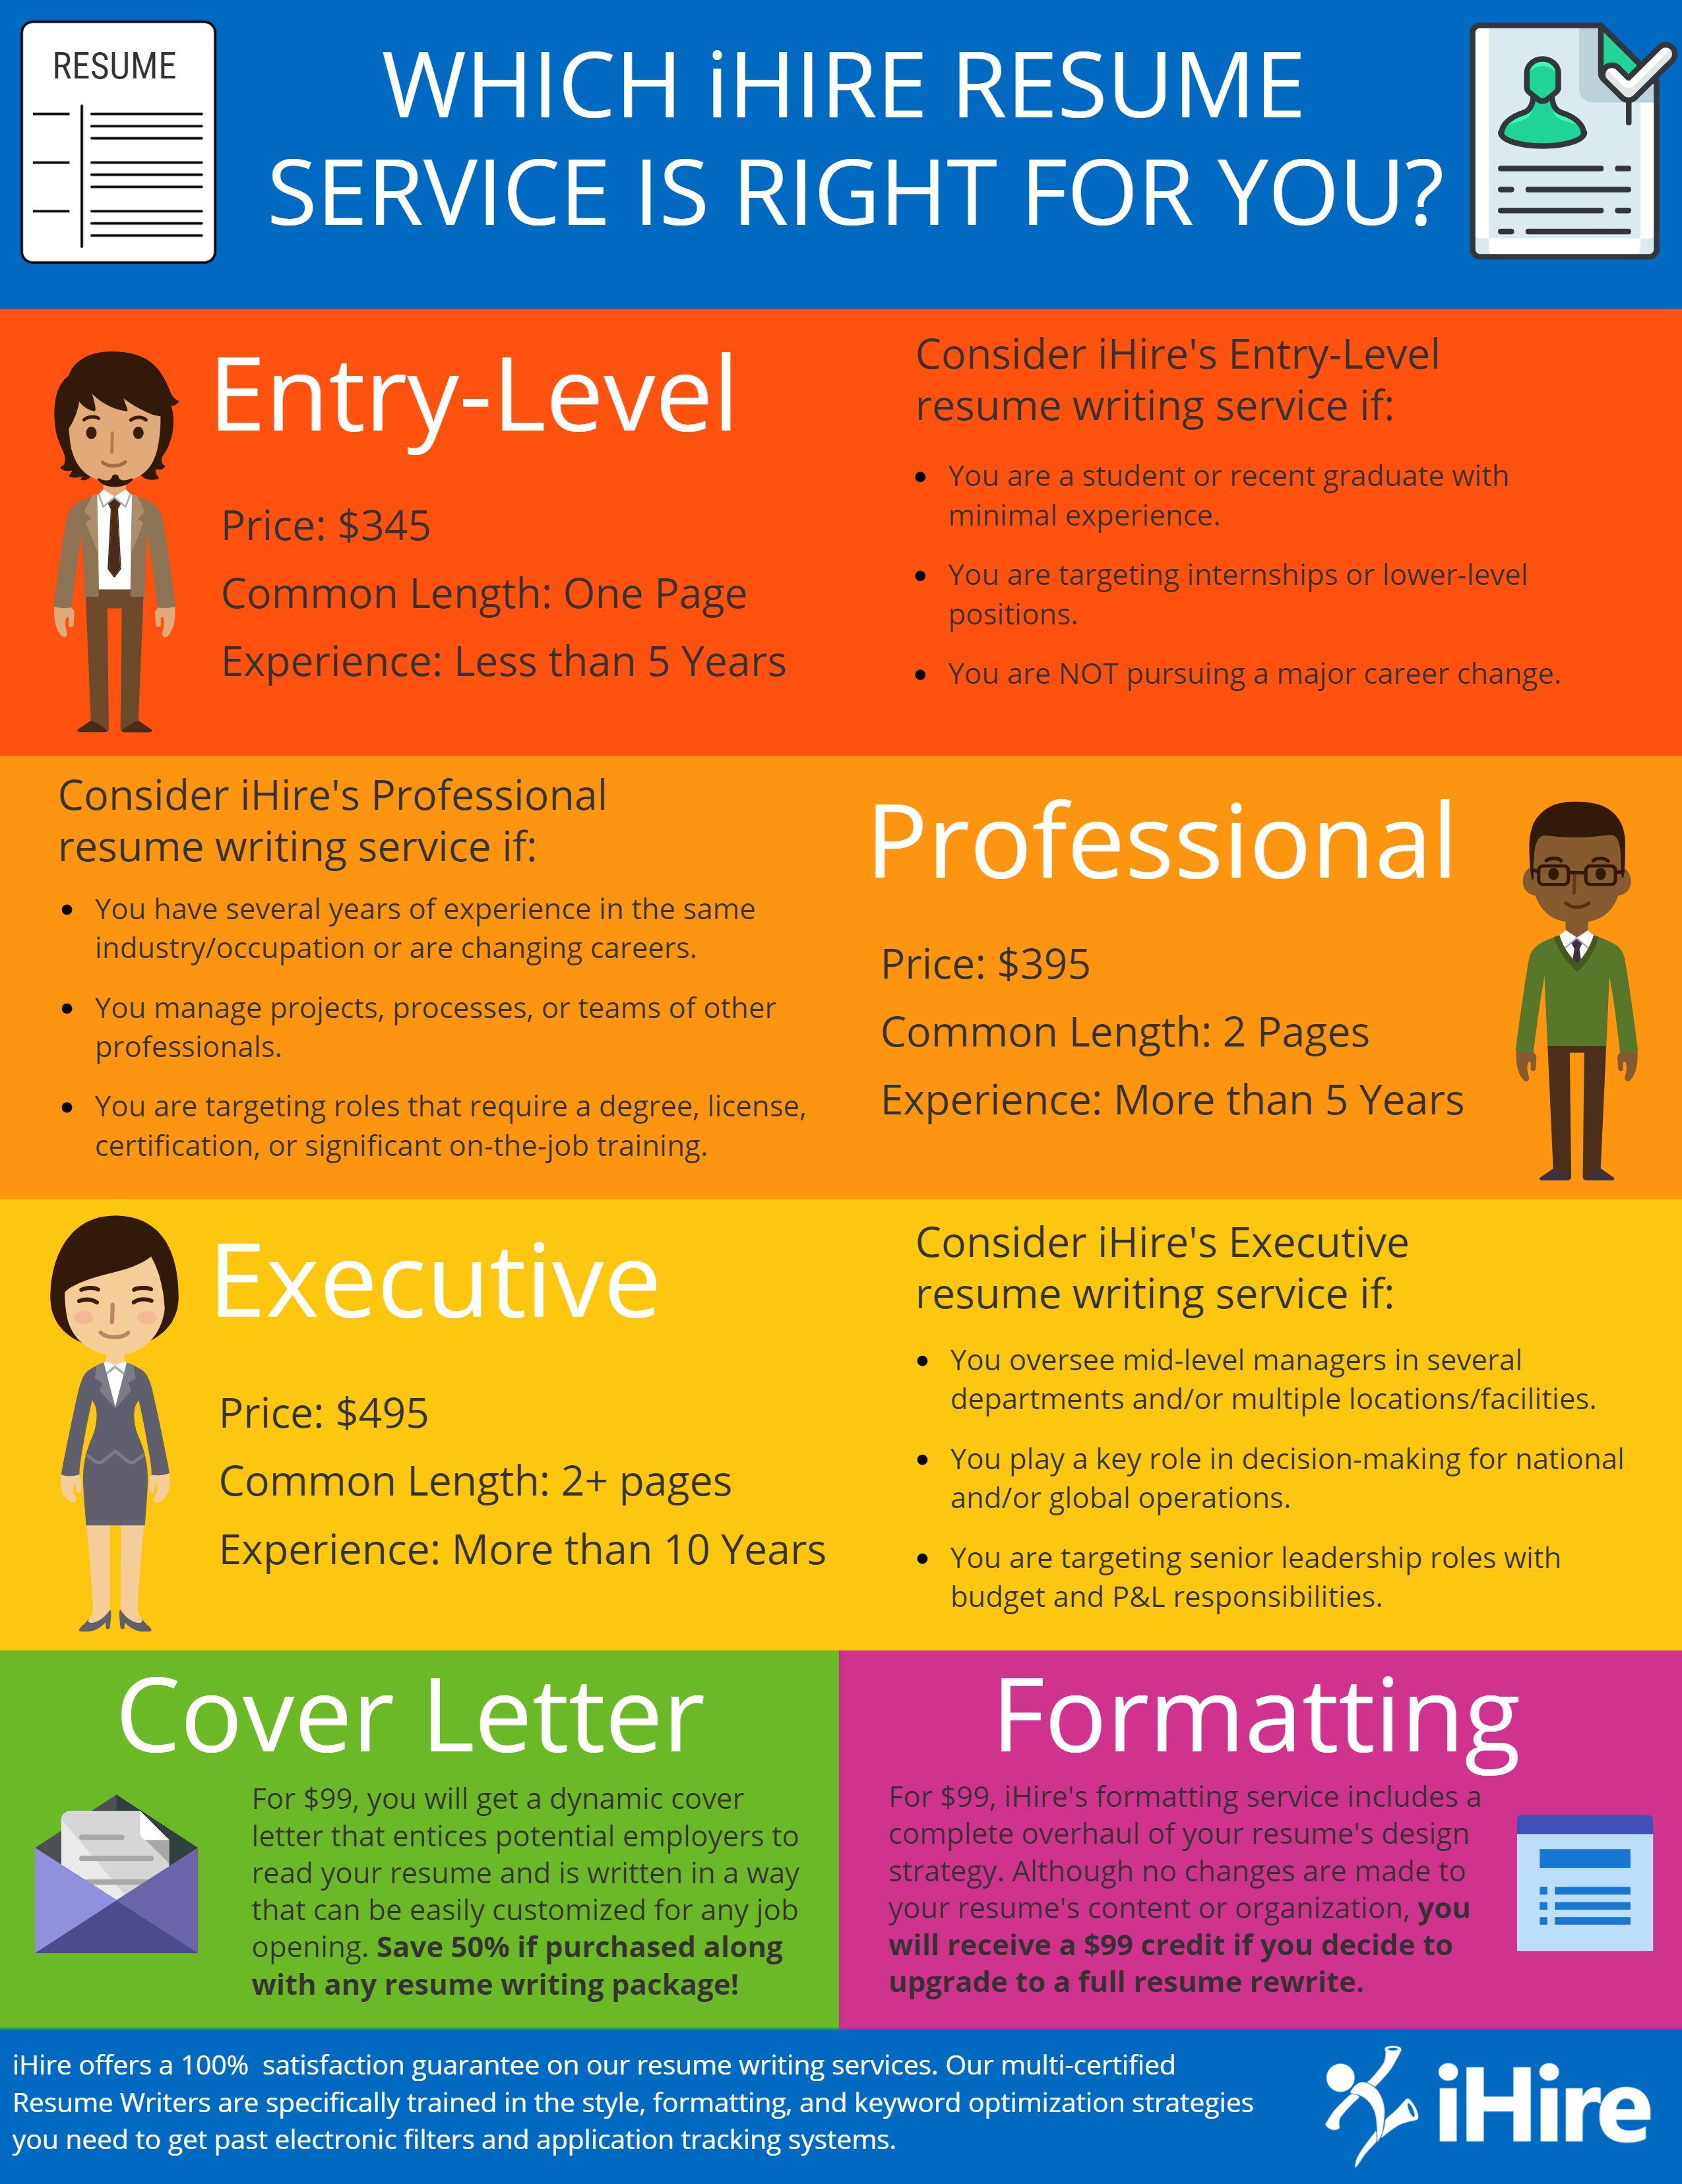 Airline resume writing service